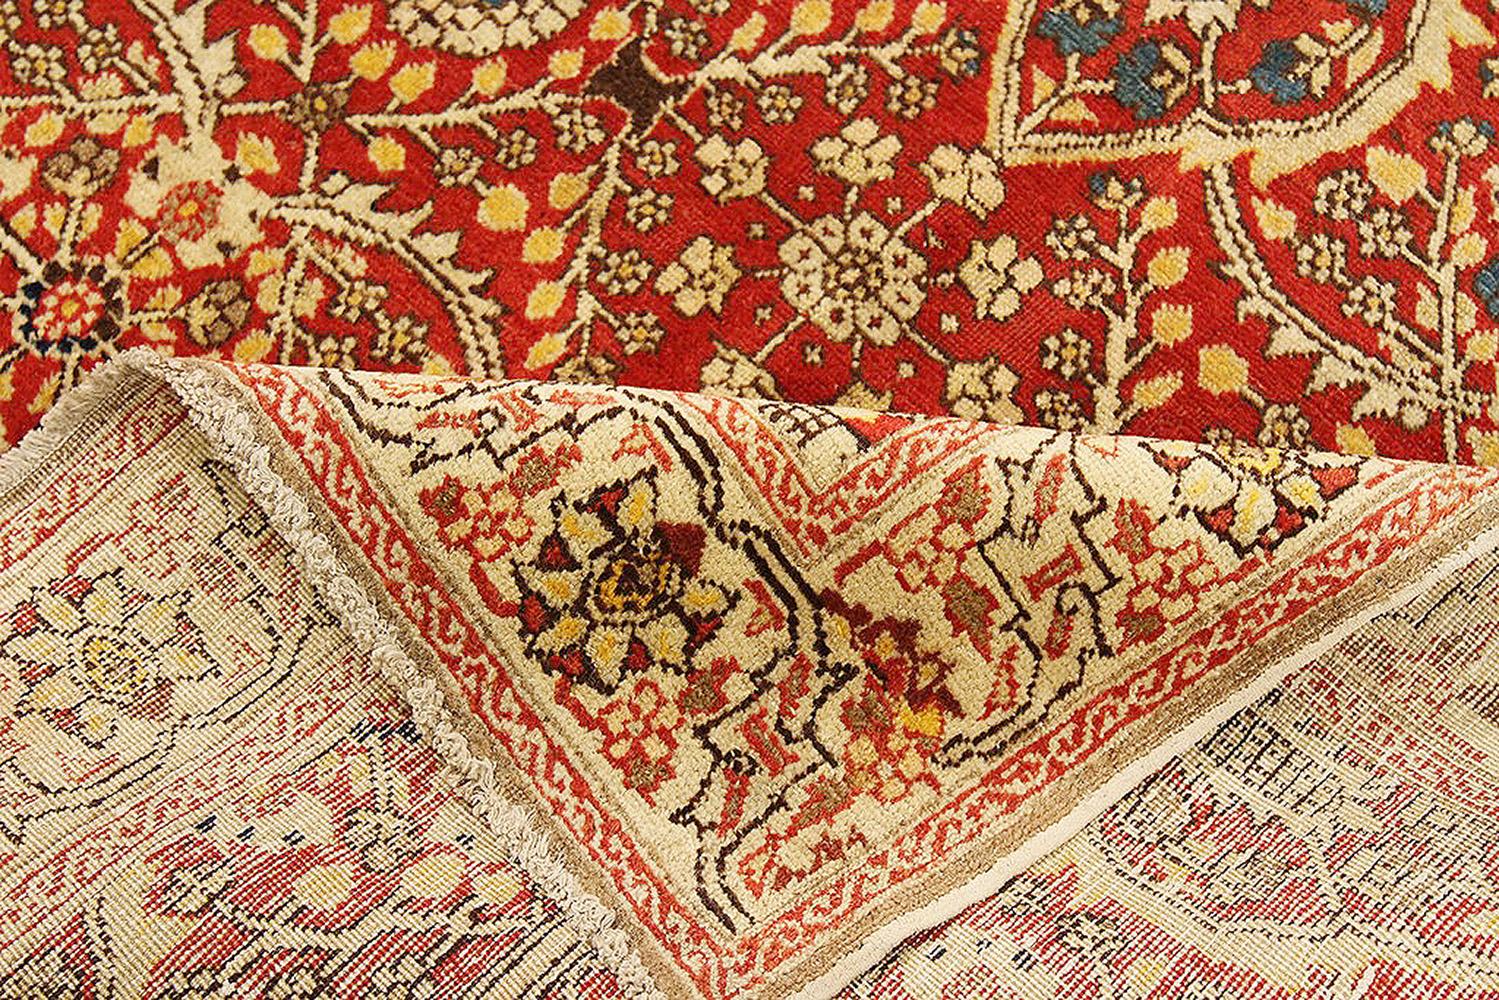 Hand-Woven Antique Persian Tabriz Rug with Ivory and Navy Flower Details on Red Field For Sale